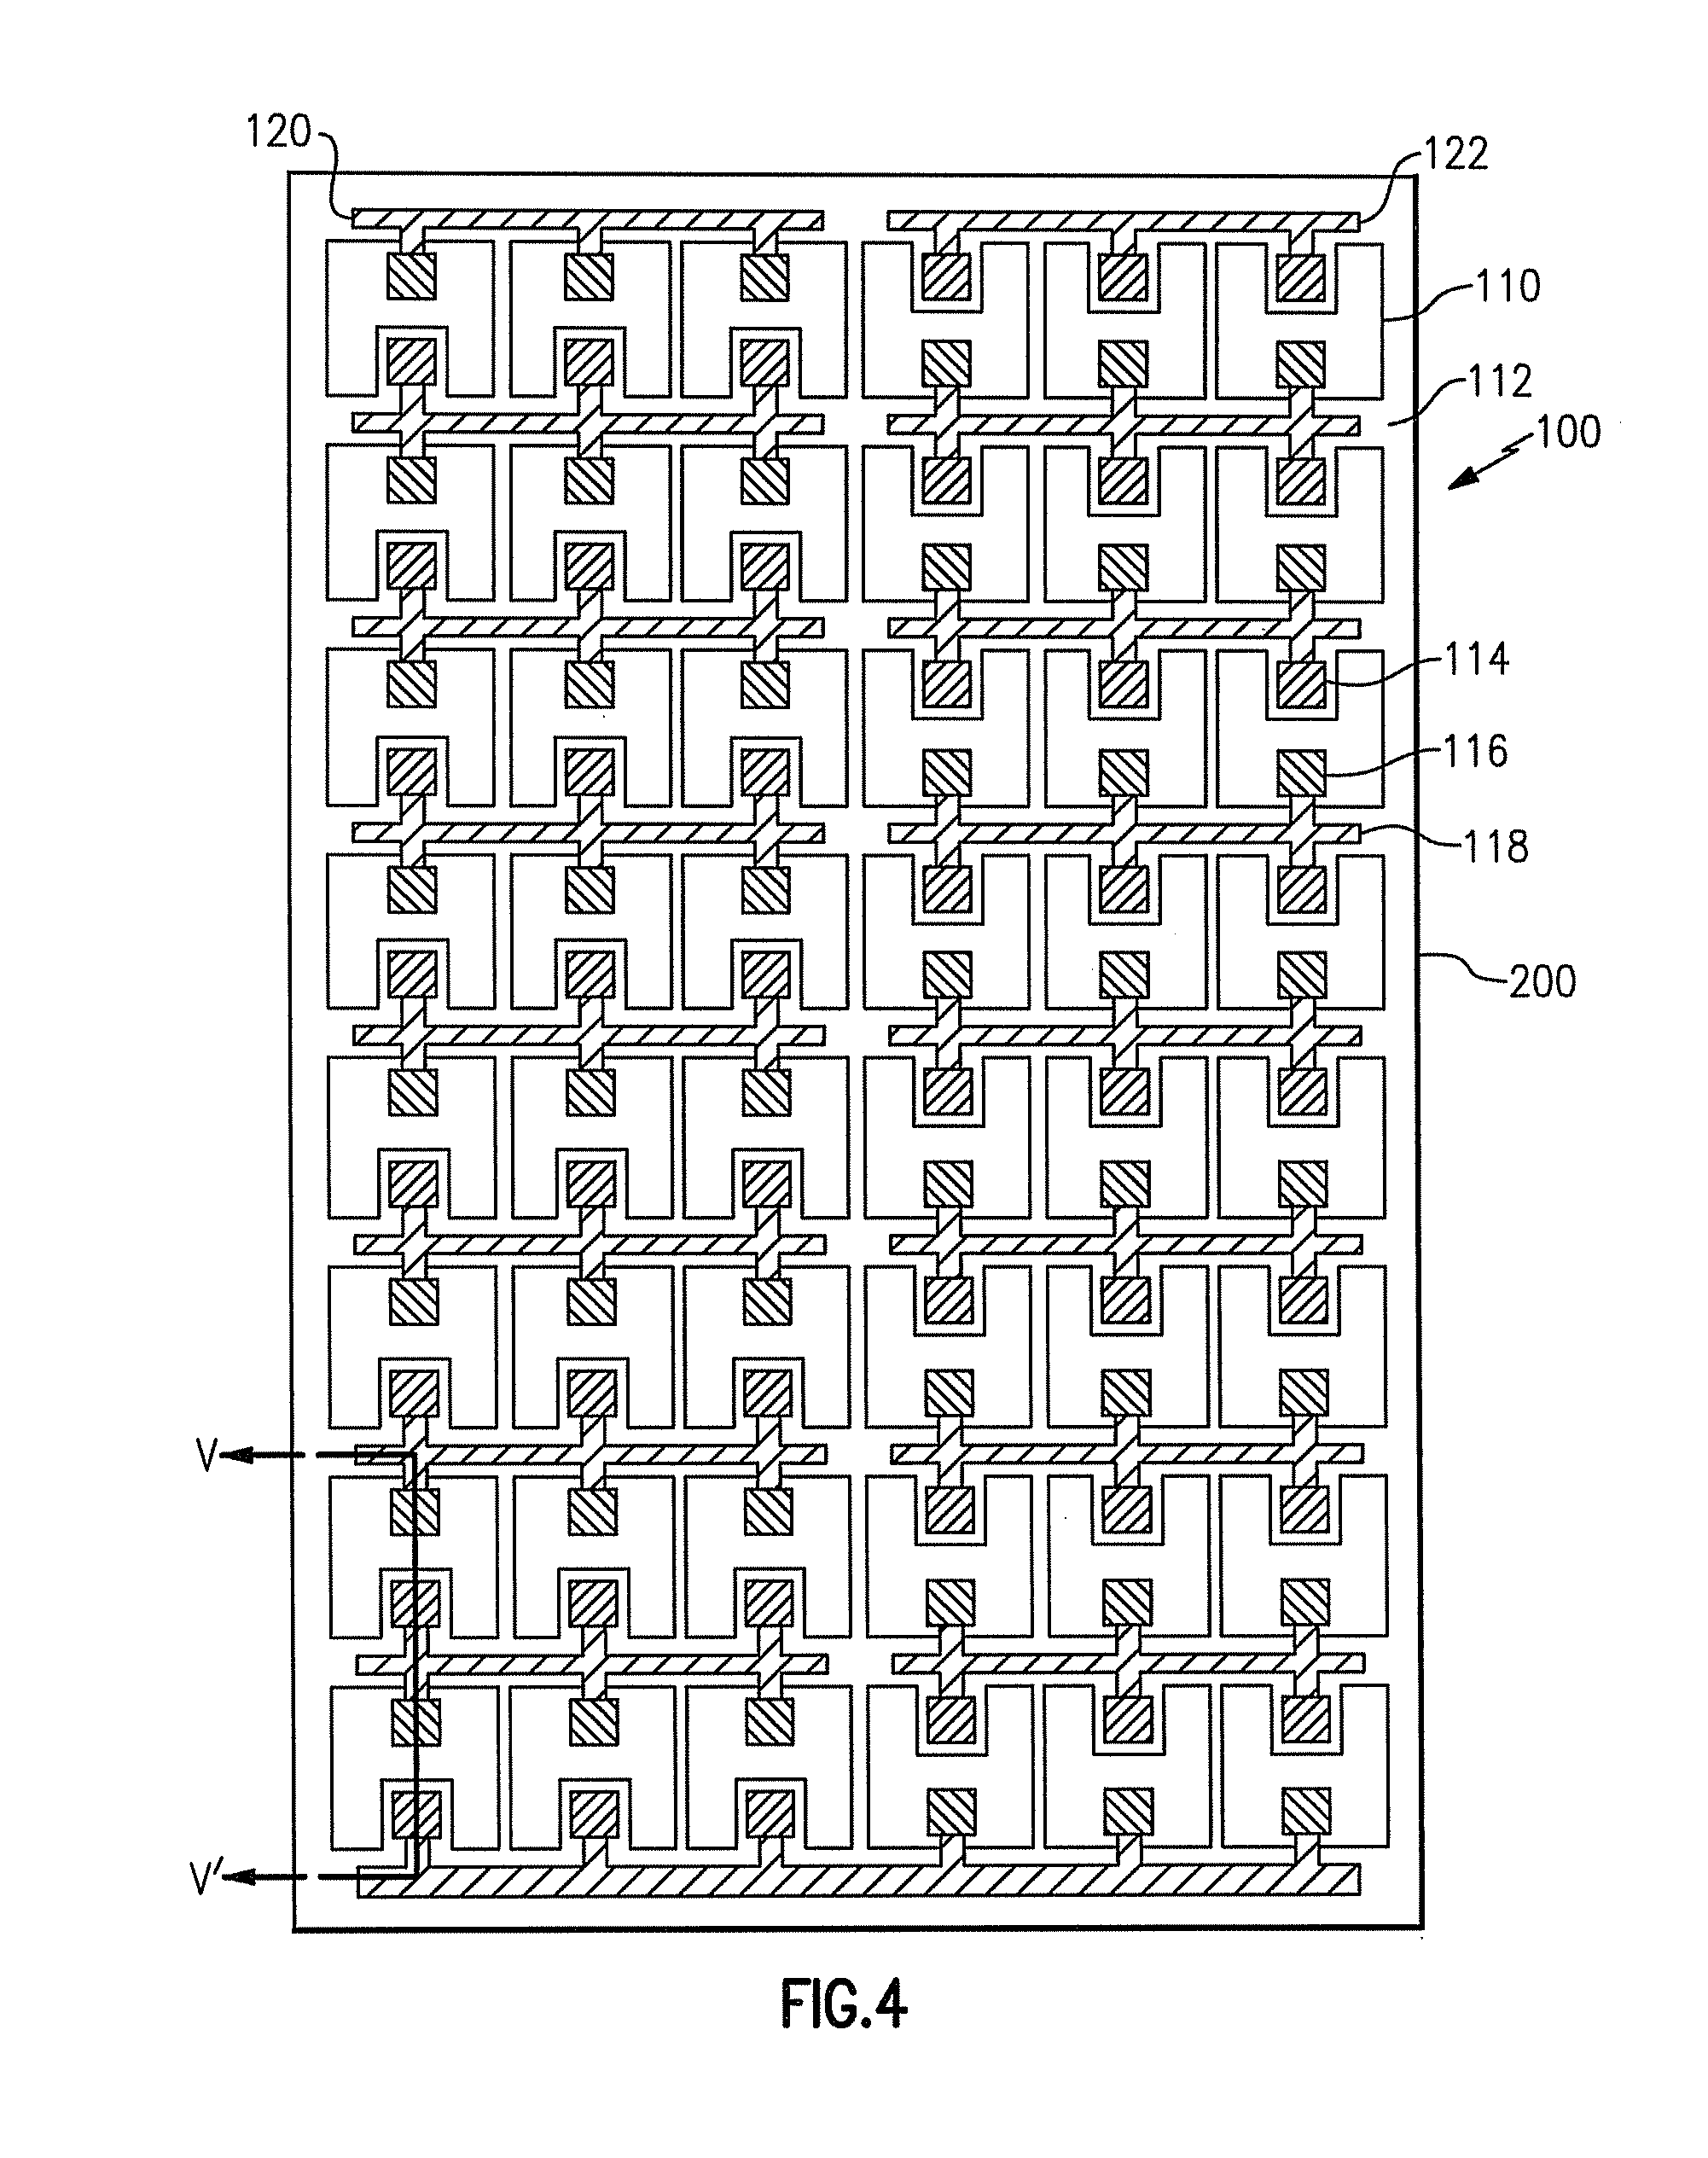 Fault tolerant light emitters, systems incorporating fault tolerant light emitters and methods of fabricating fault tolerant light emitters